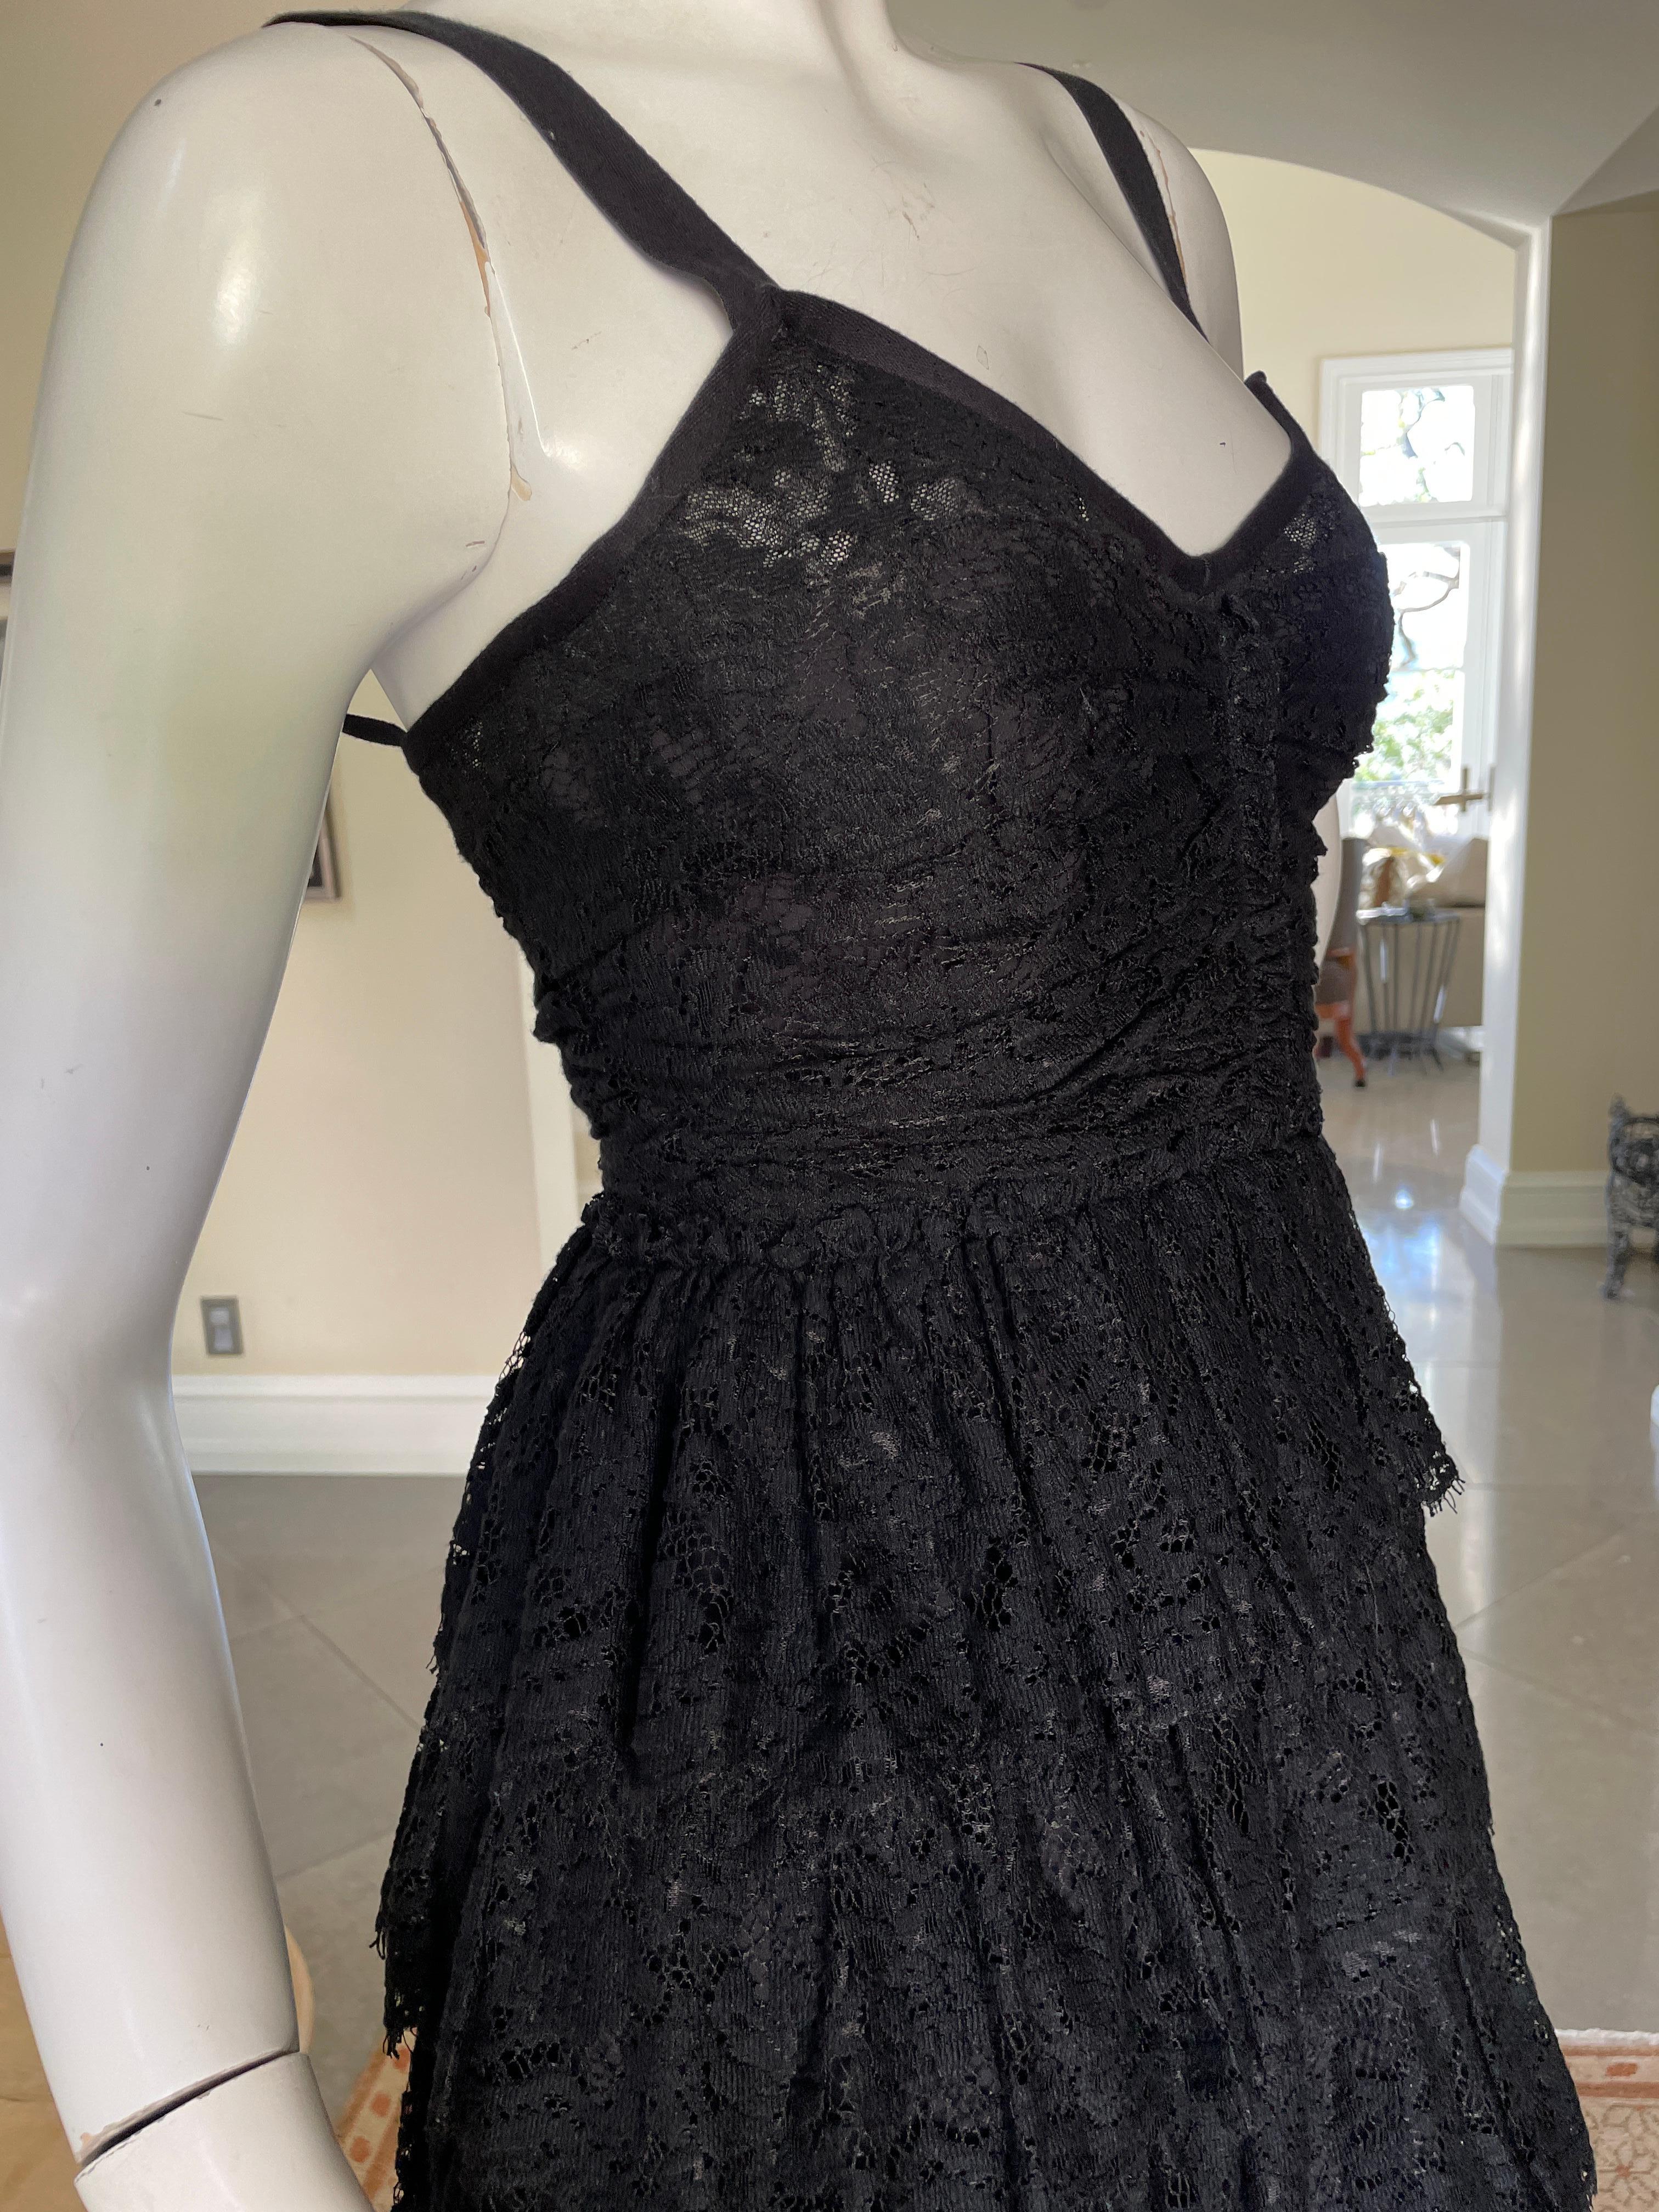 D&G by Dolce & Gabbana Vintage Black Lace Tiered Cocktail Dress    In Excellent Condition For Sale In Cloverdale, CA